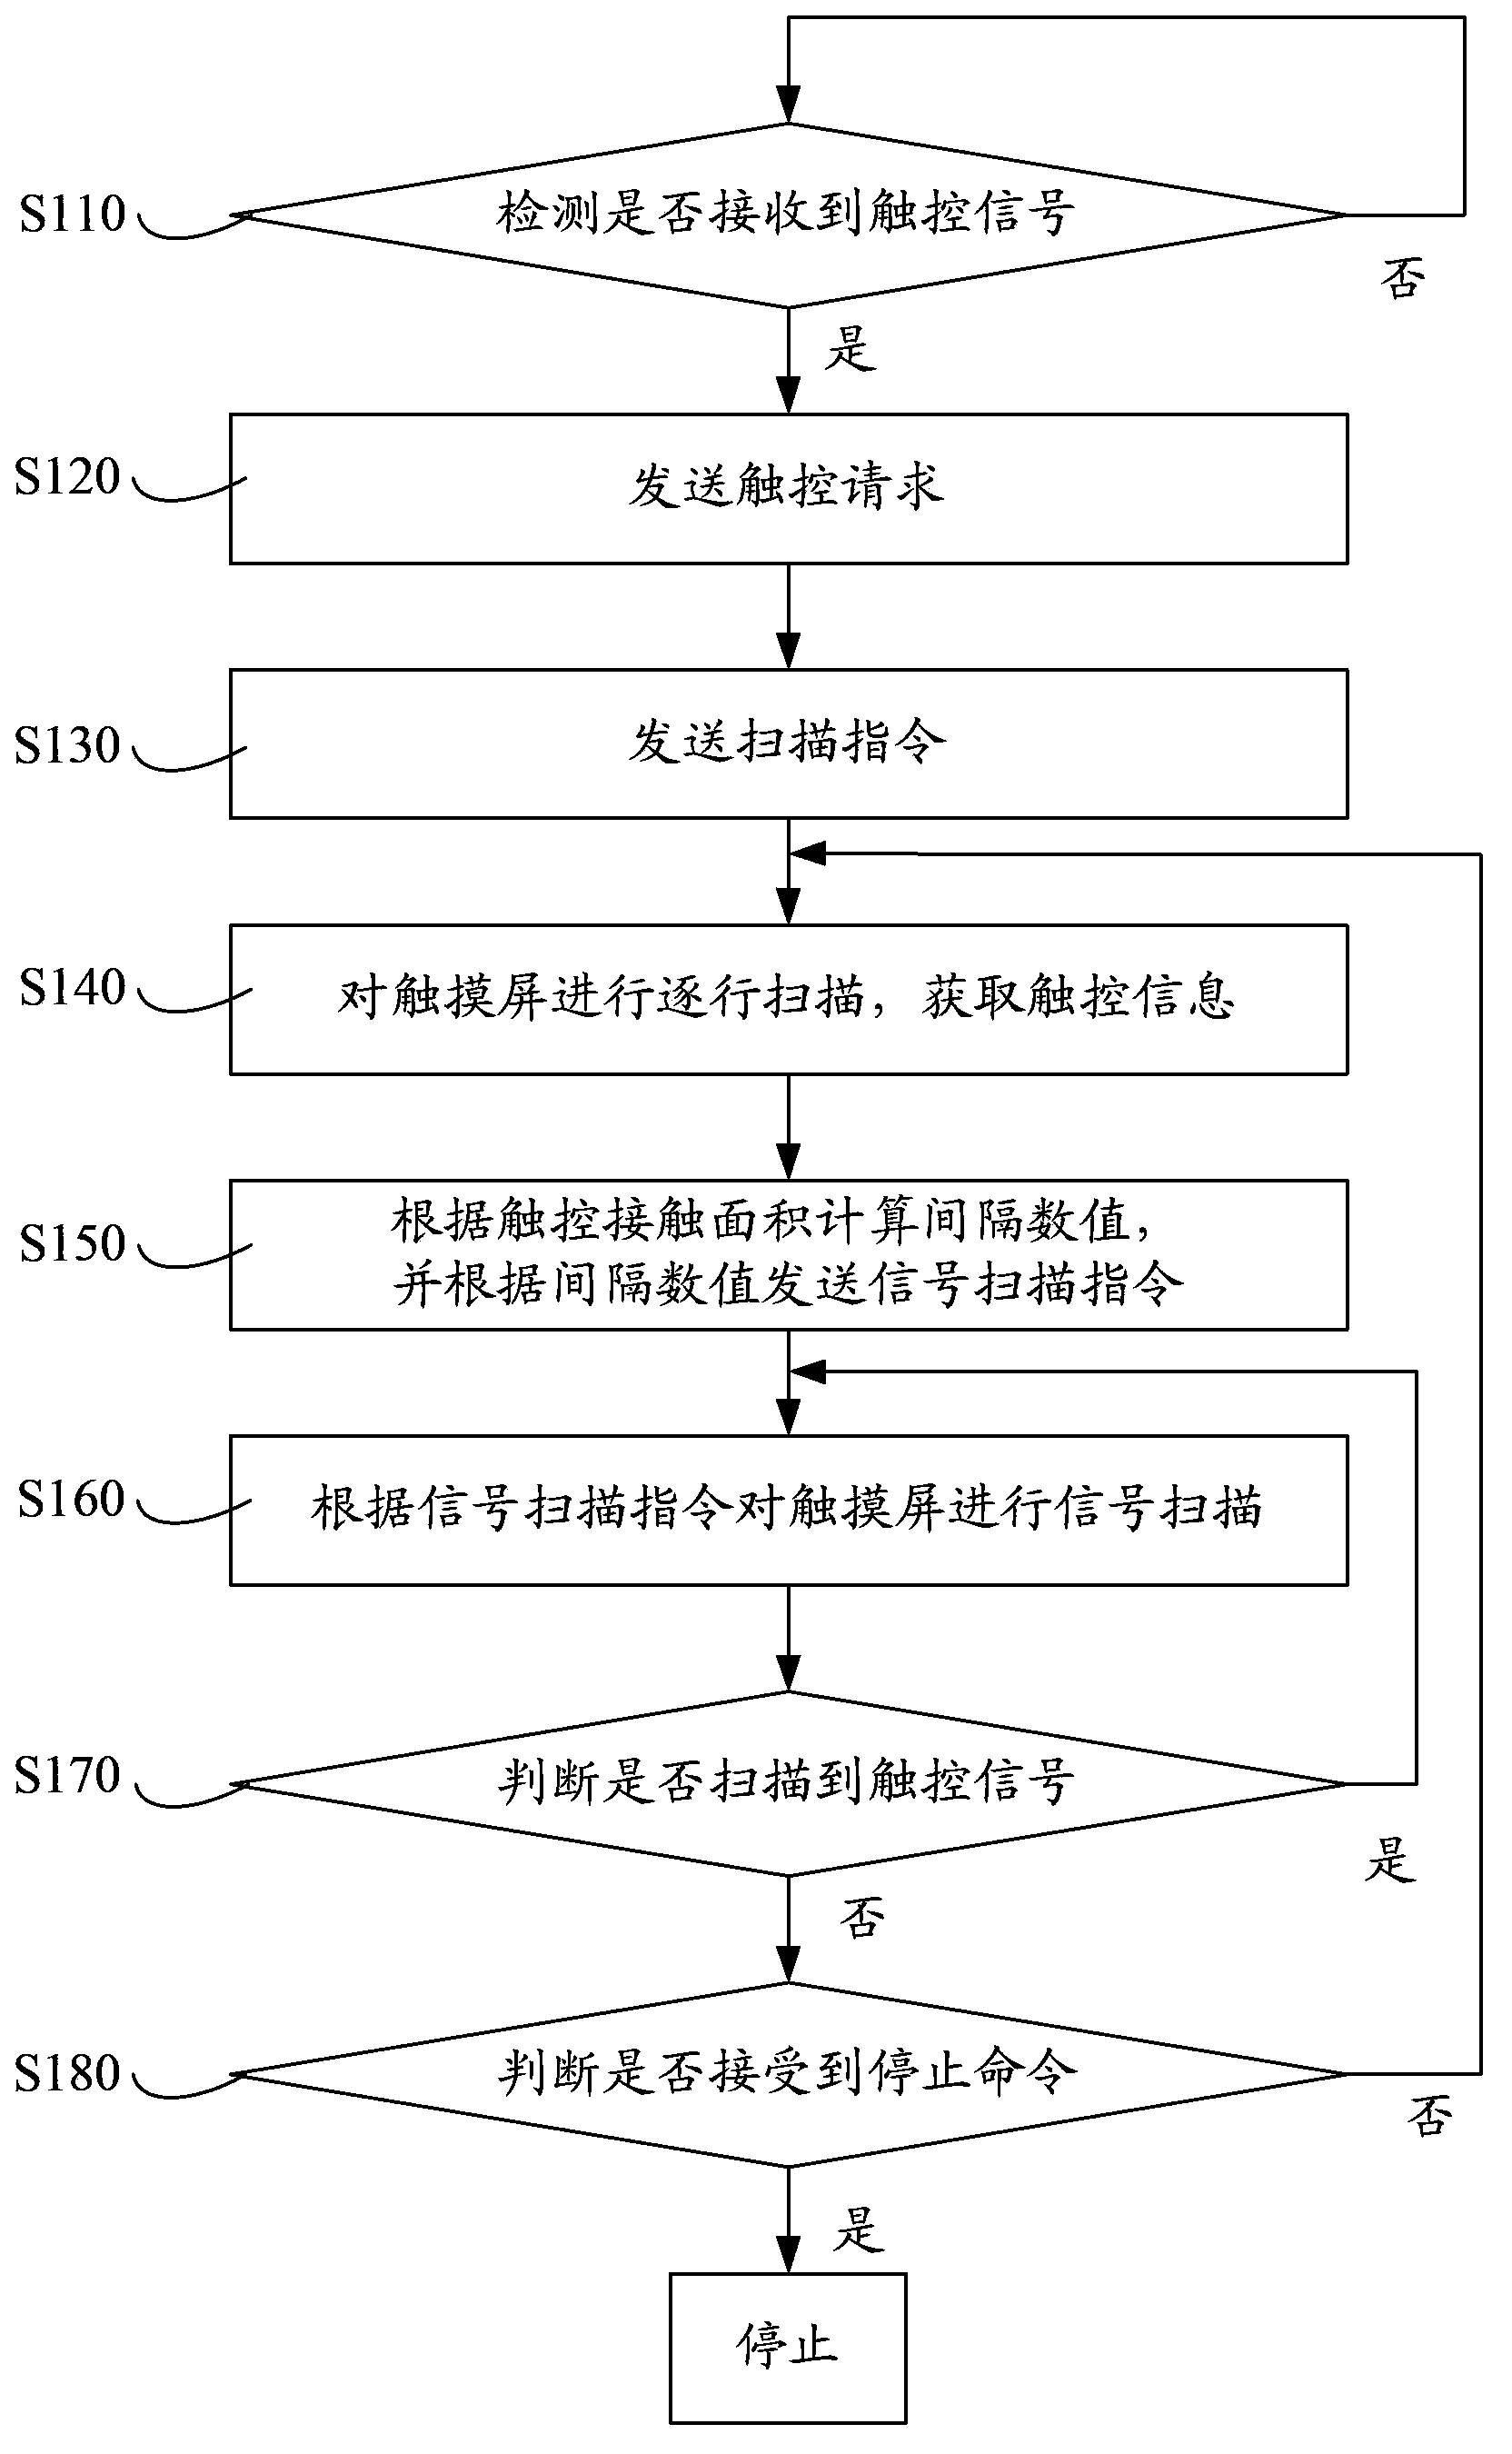 Touch screen scanning method, system and device